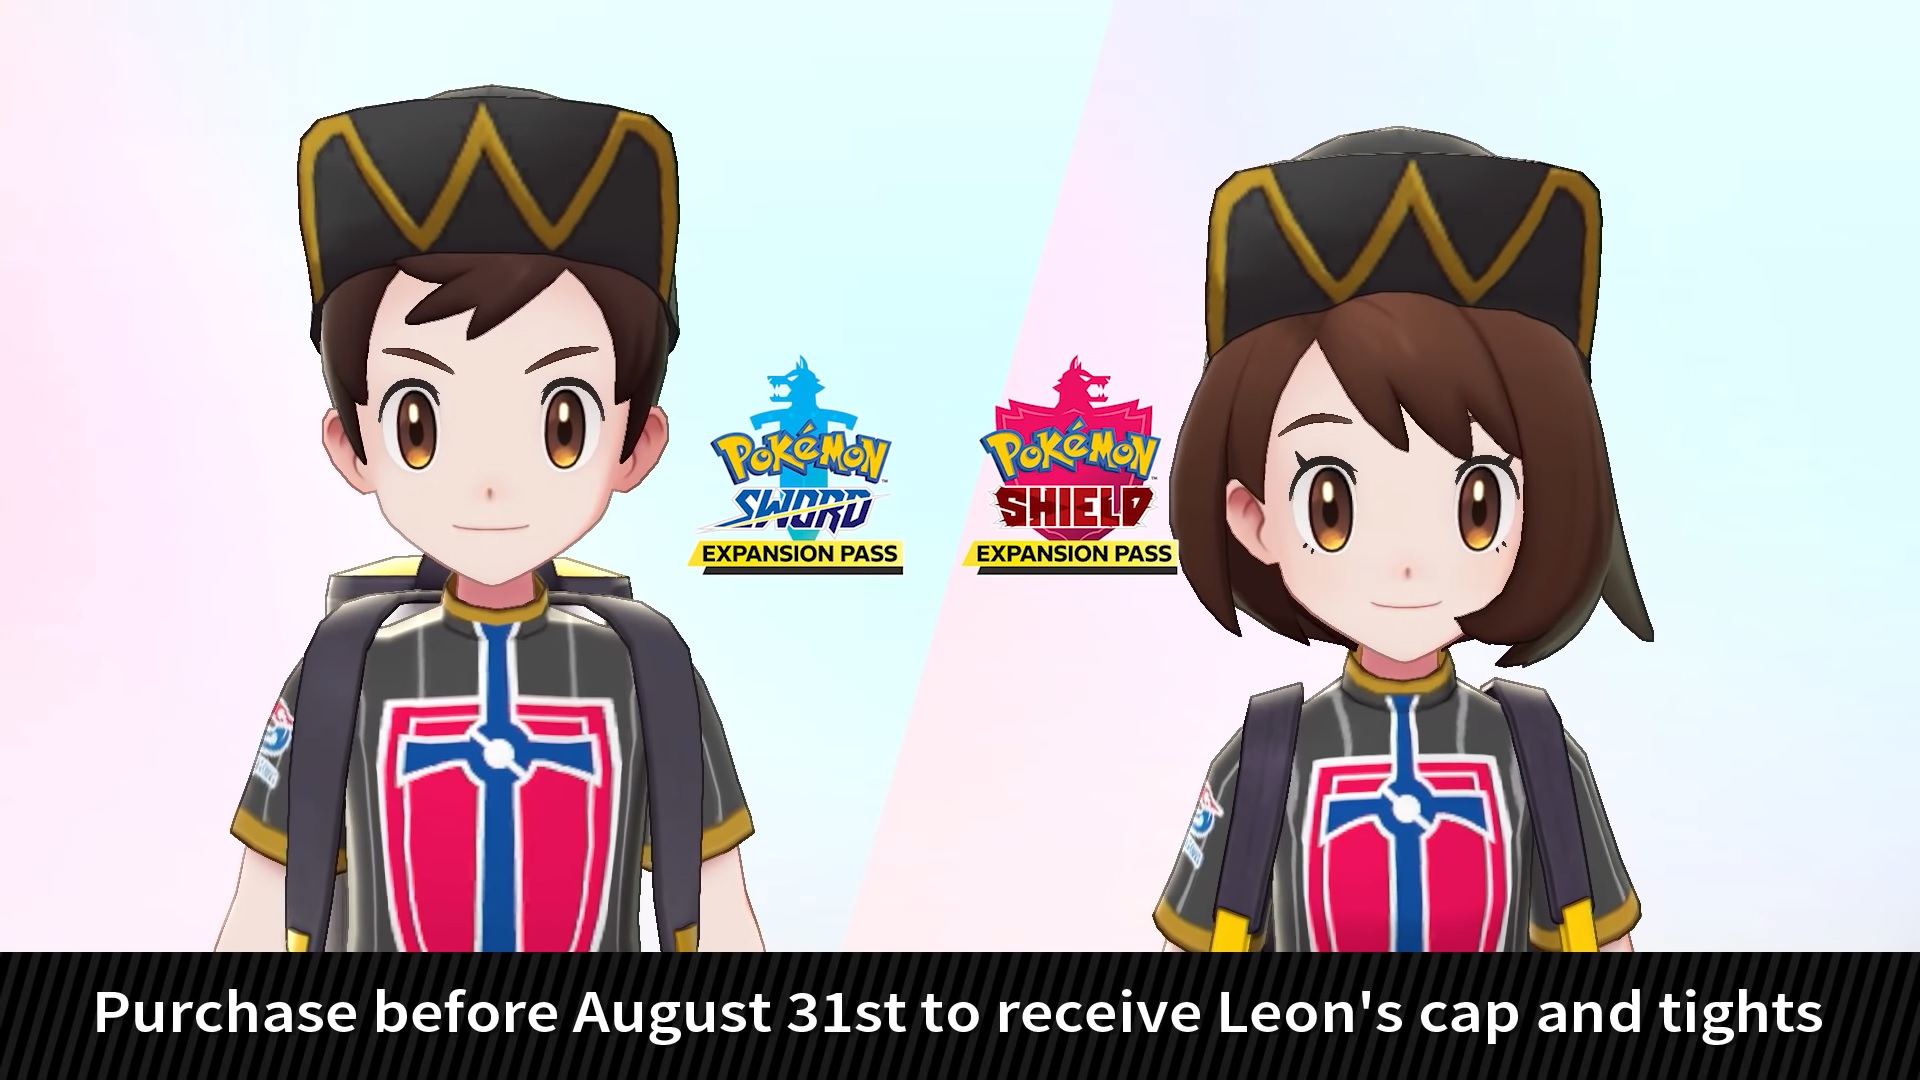 Pokemon Sword and Shield has counterfeit Pokemon, here's how to